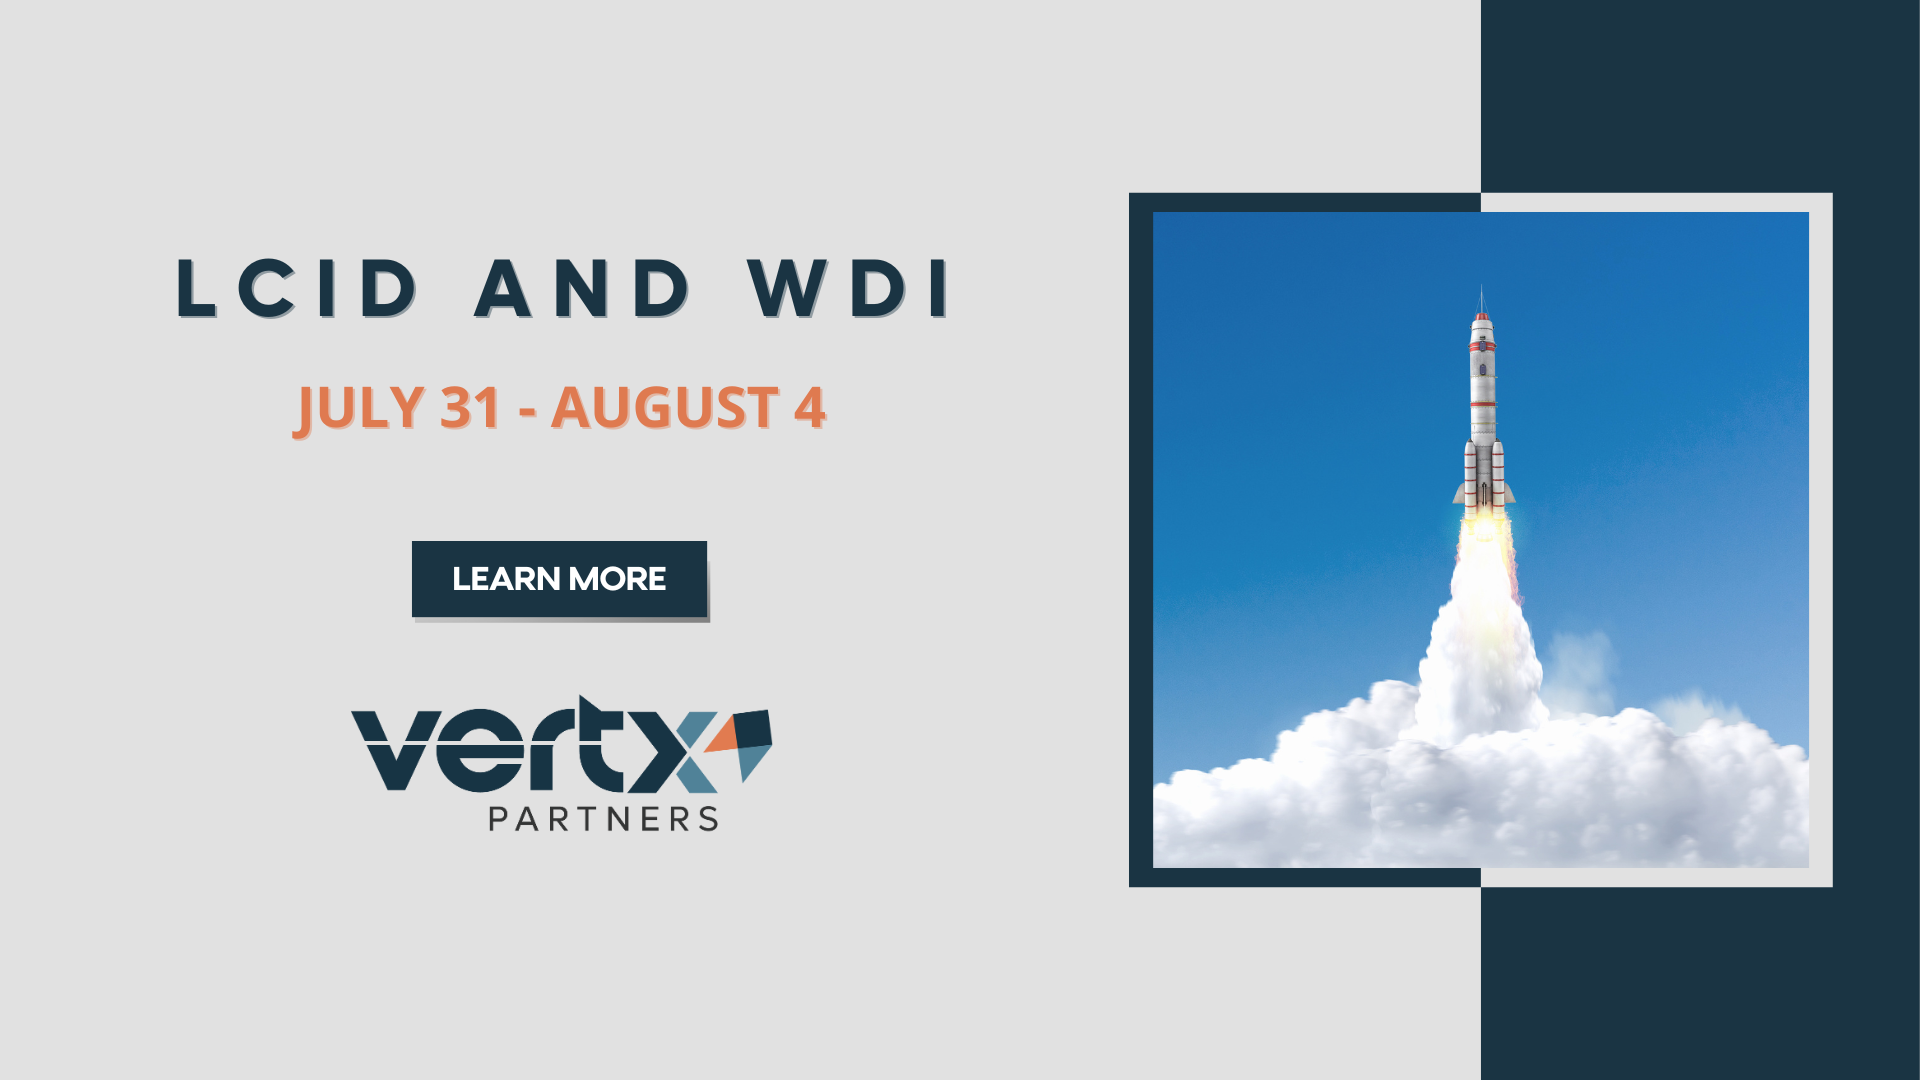 This graphic includes the title LCID and WDI with the dates July 31- August 4 under it and a photo of a rocket launching next to the text.